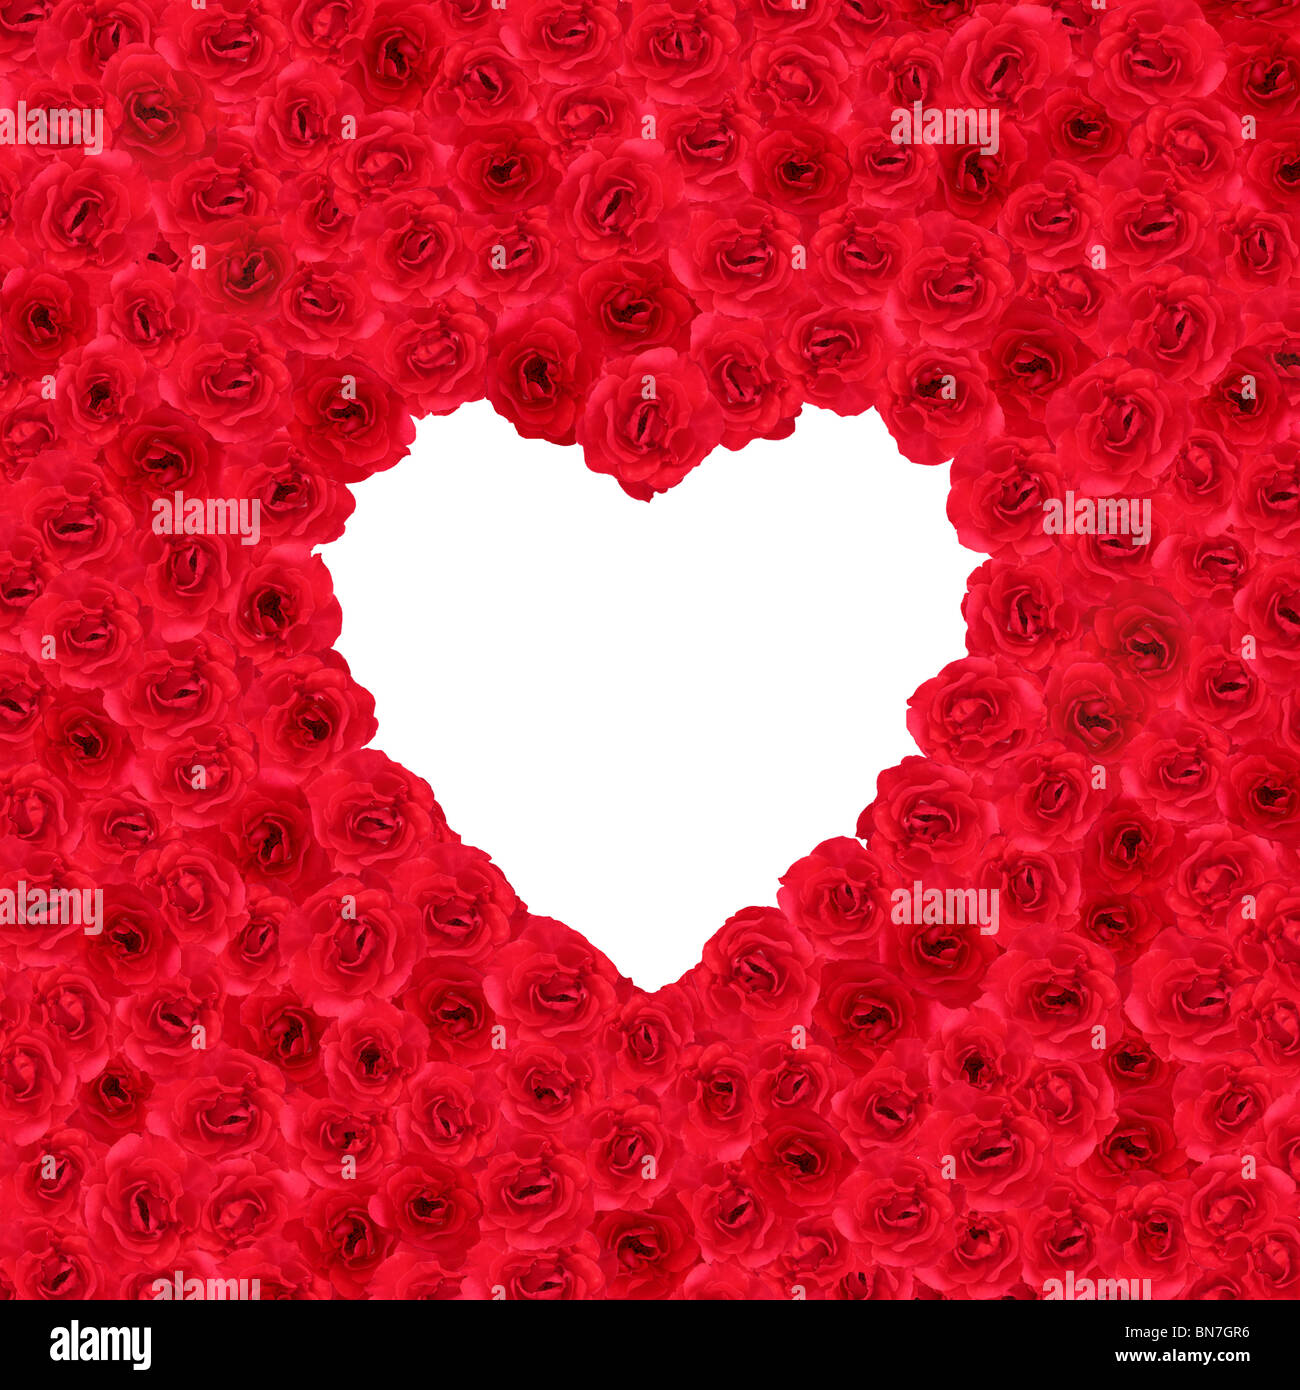 Many red roses forming a heart shape in a square format Stock Photo